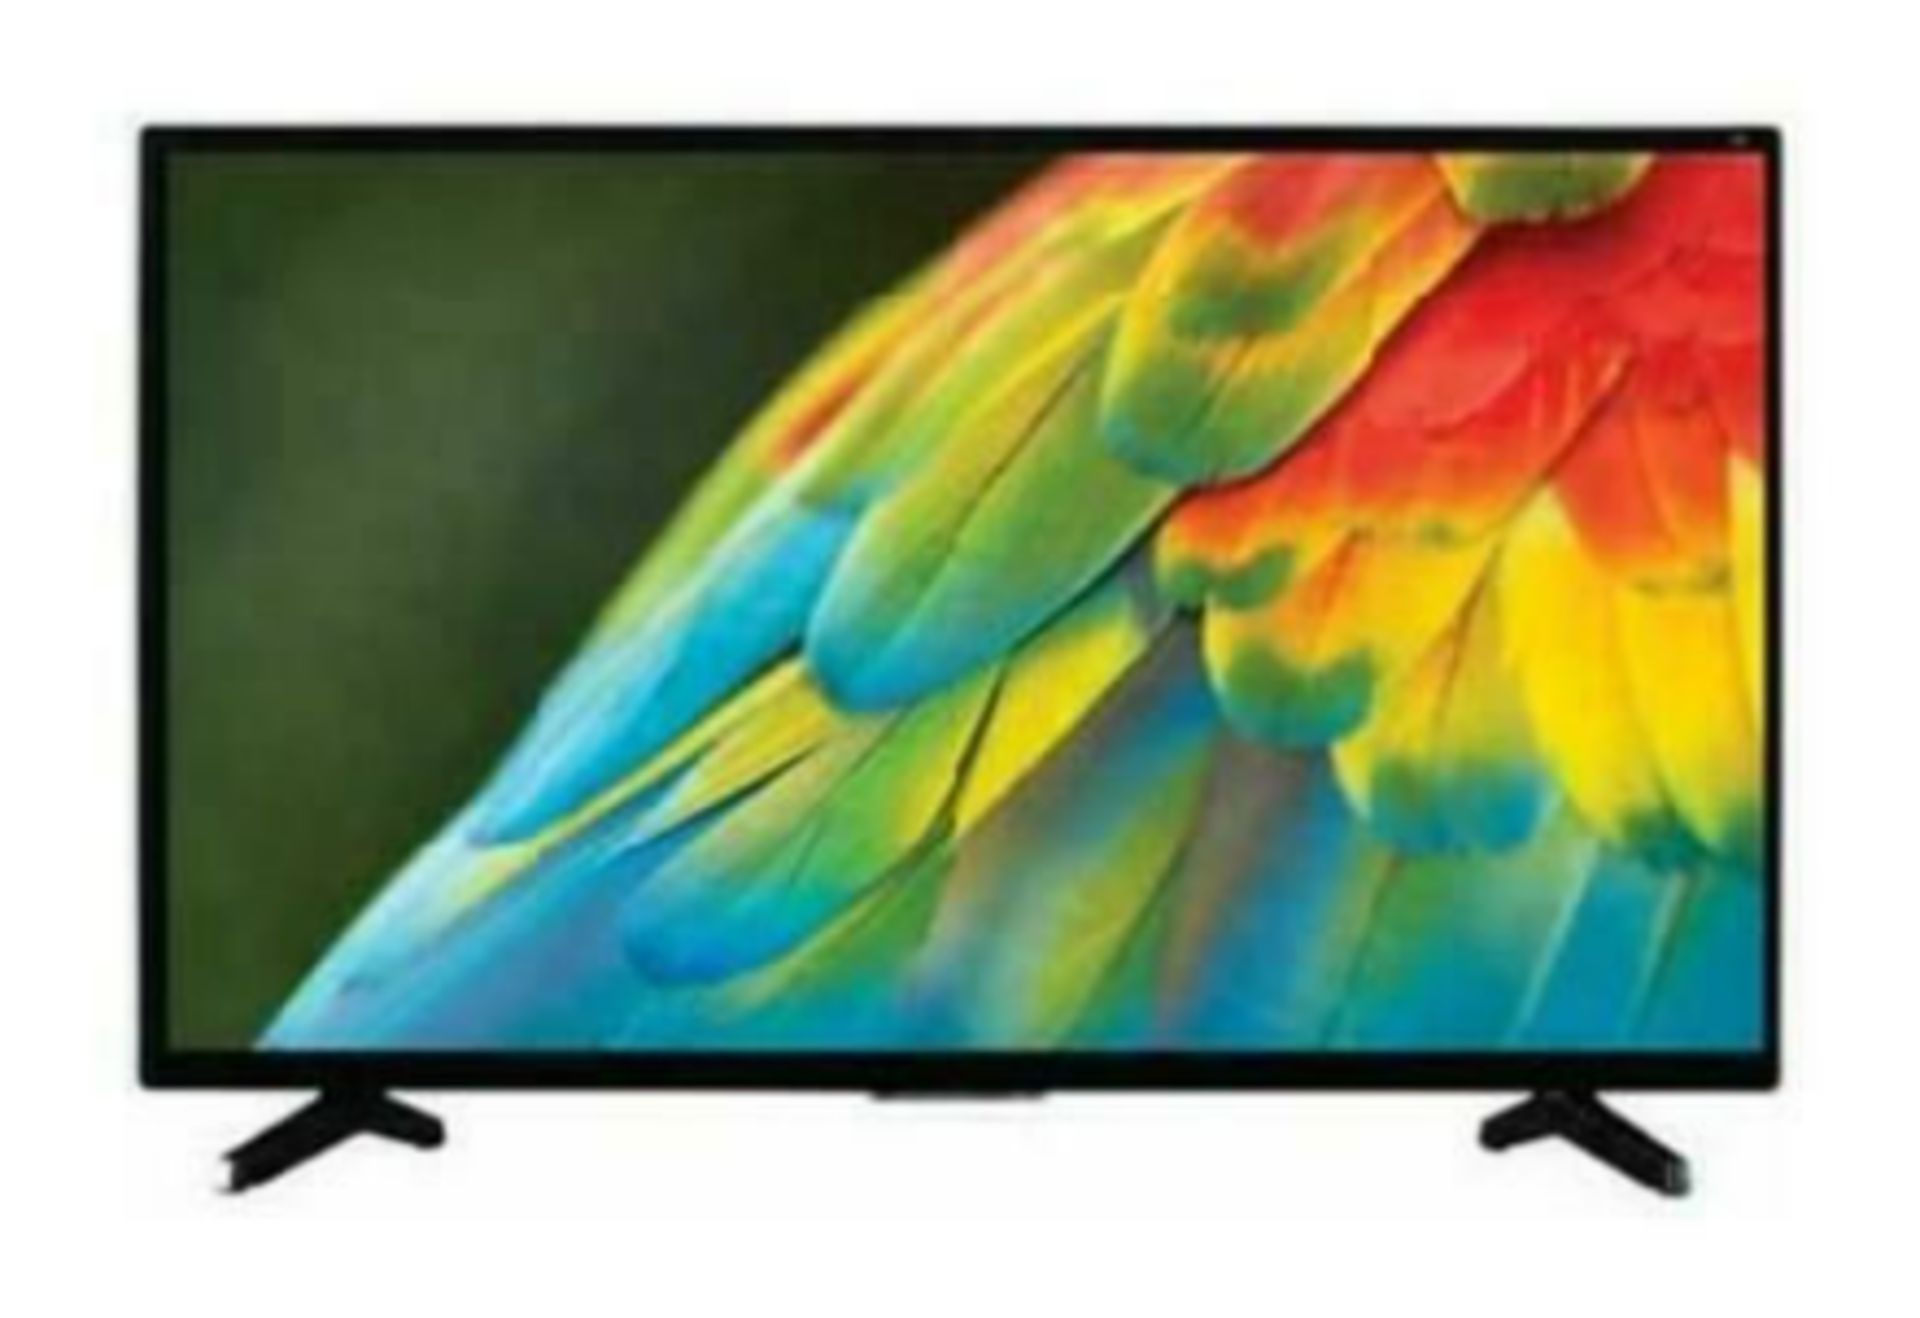 BRAND NEW AND BOXED 32" HD READY LED SMART ANDROID TV NETFLIX PRIME FREEVIEW PLAY GOOGLE